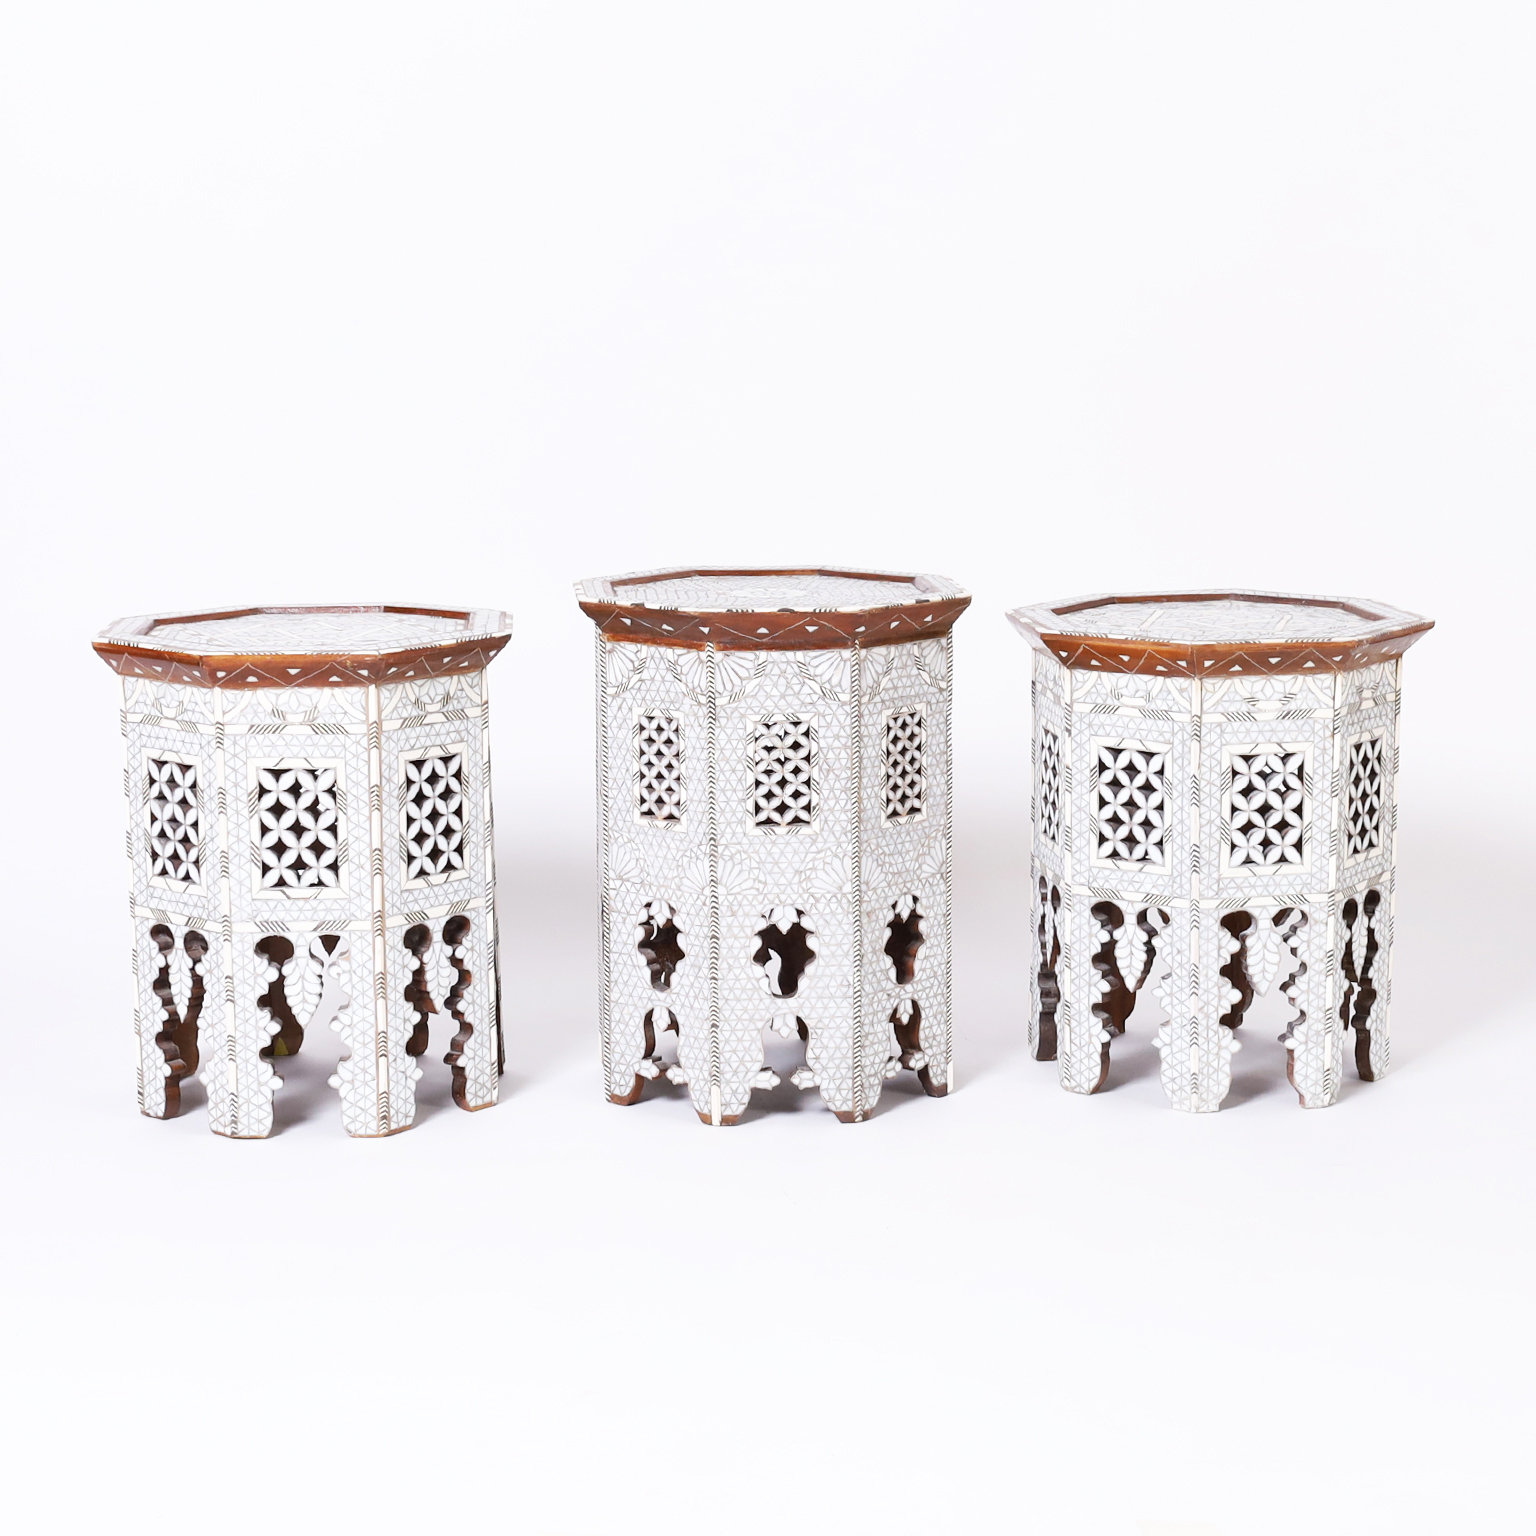 Set of Three Moroccan Mother of Pearl Stands, Priced Individually